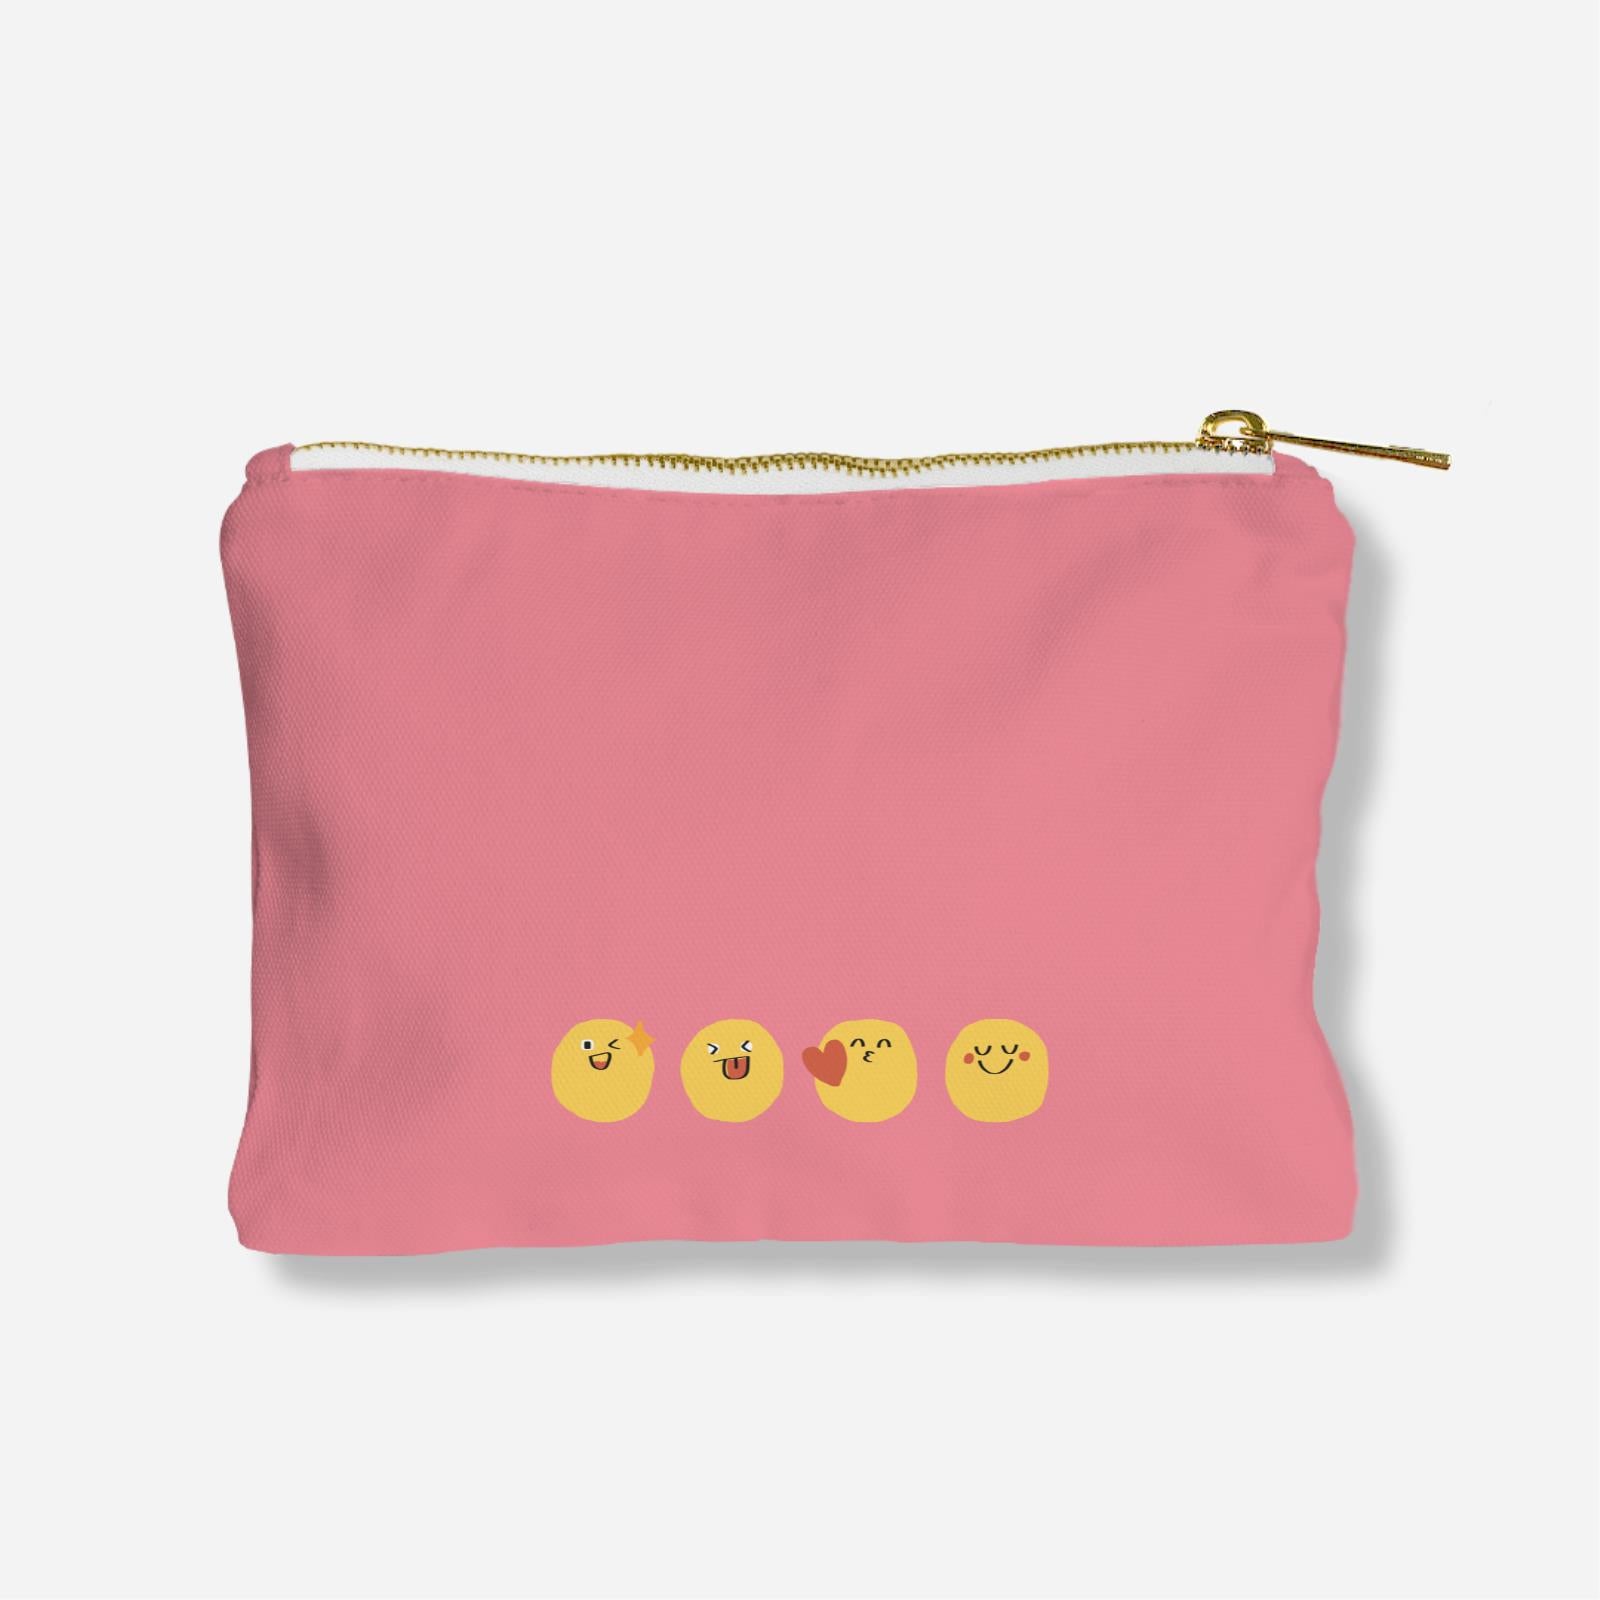 Be Confident Series Zipper Pouch - Stay Positive - Good Things Take Time